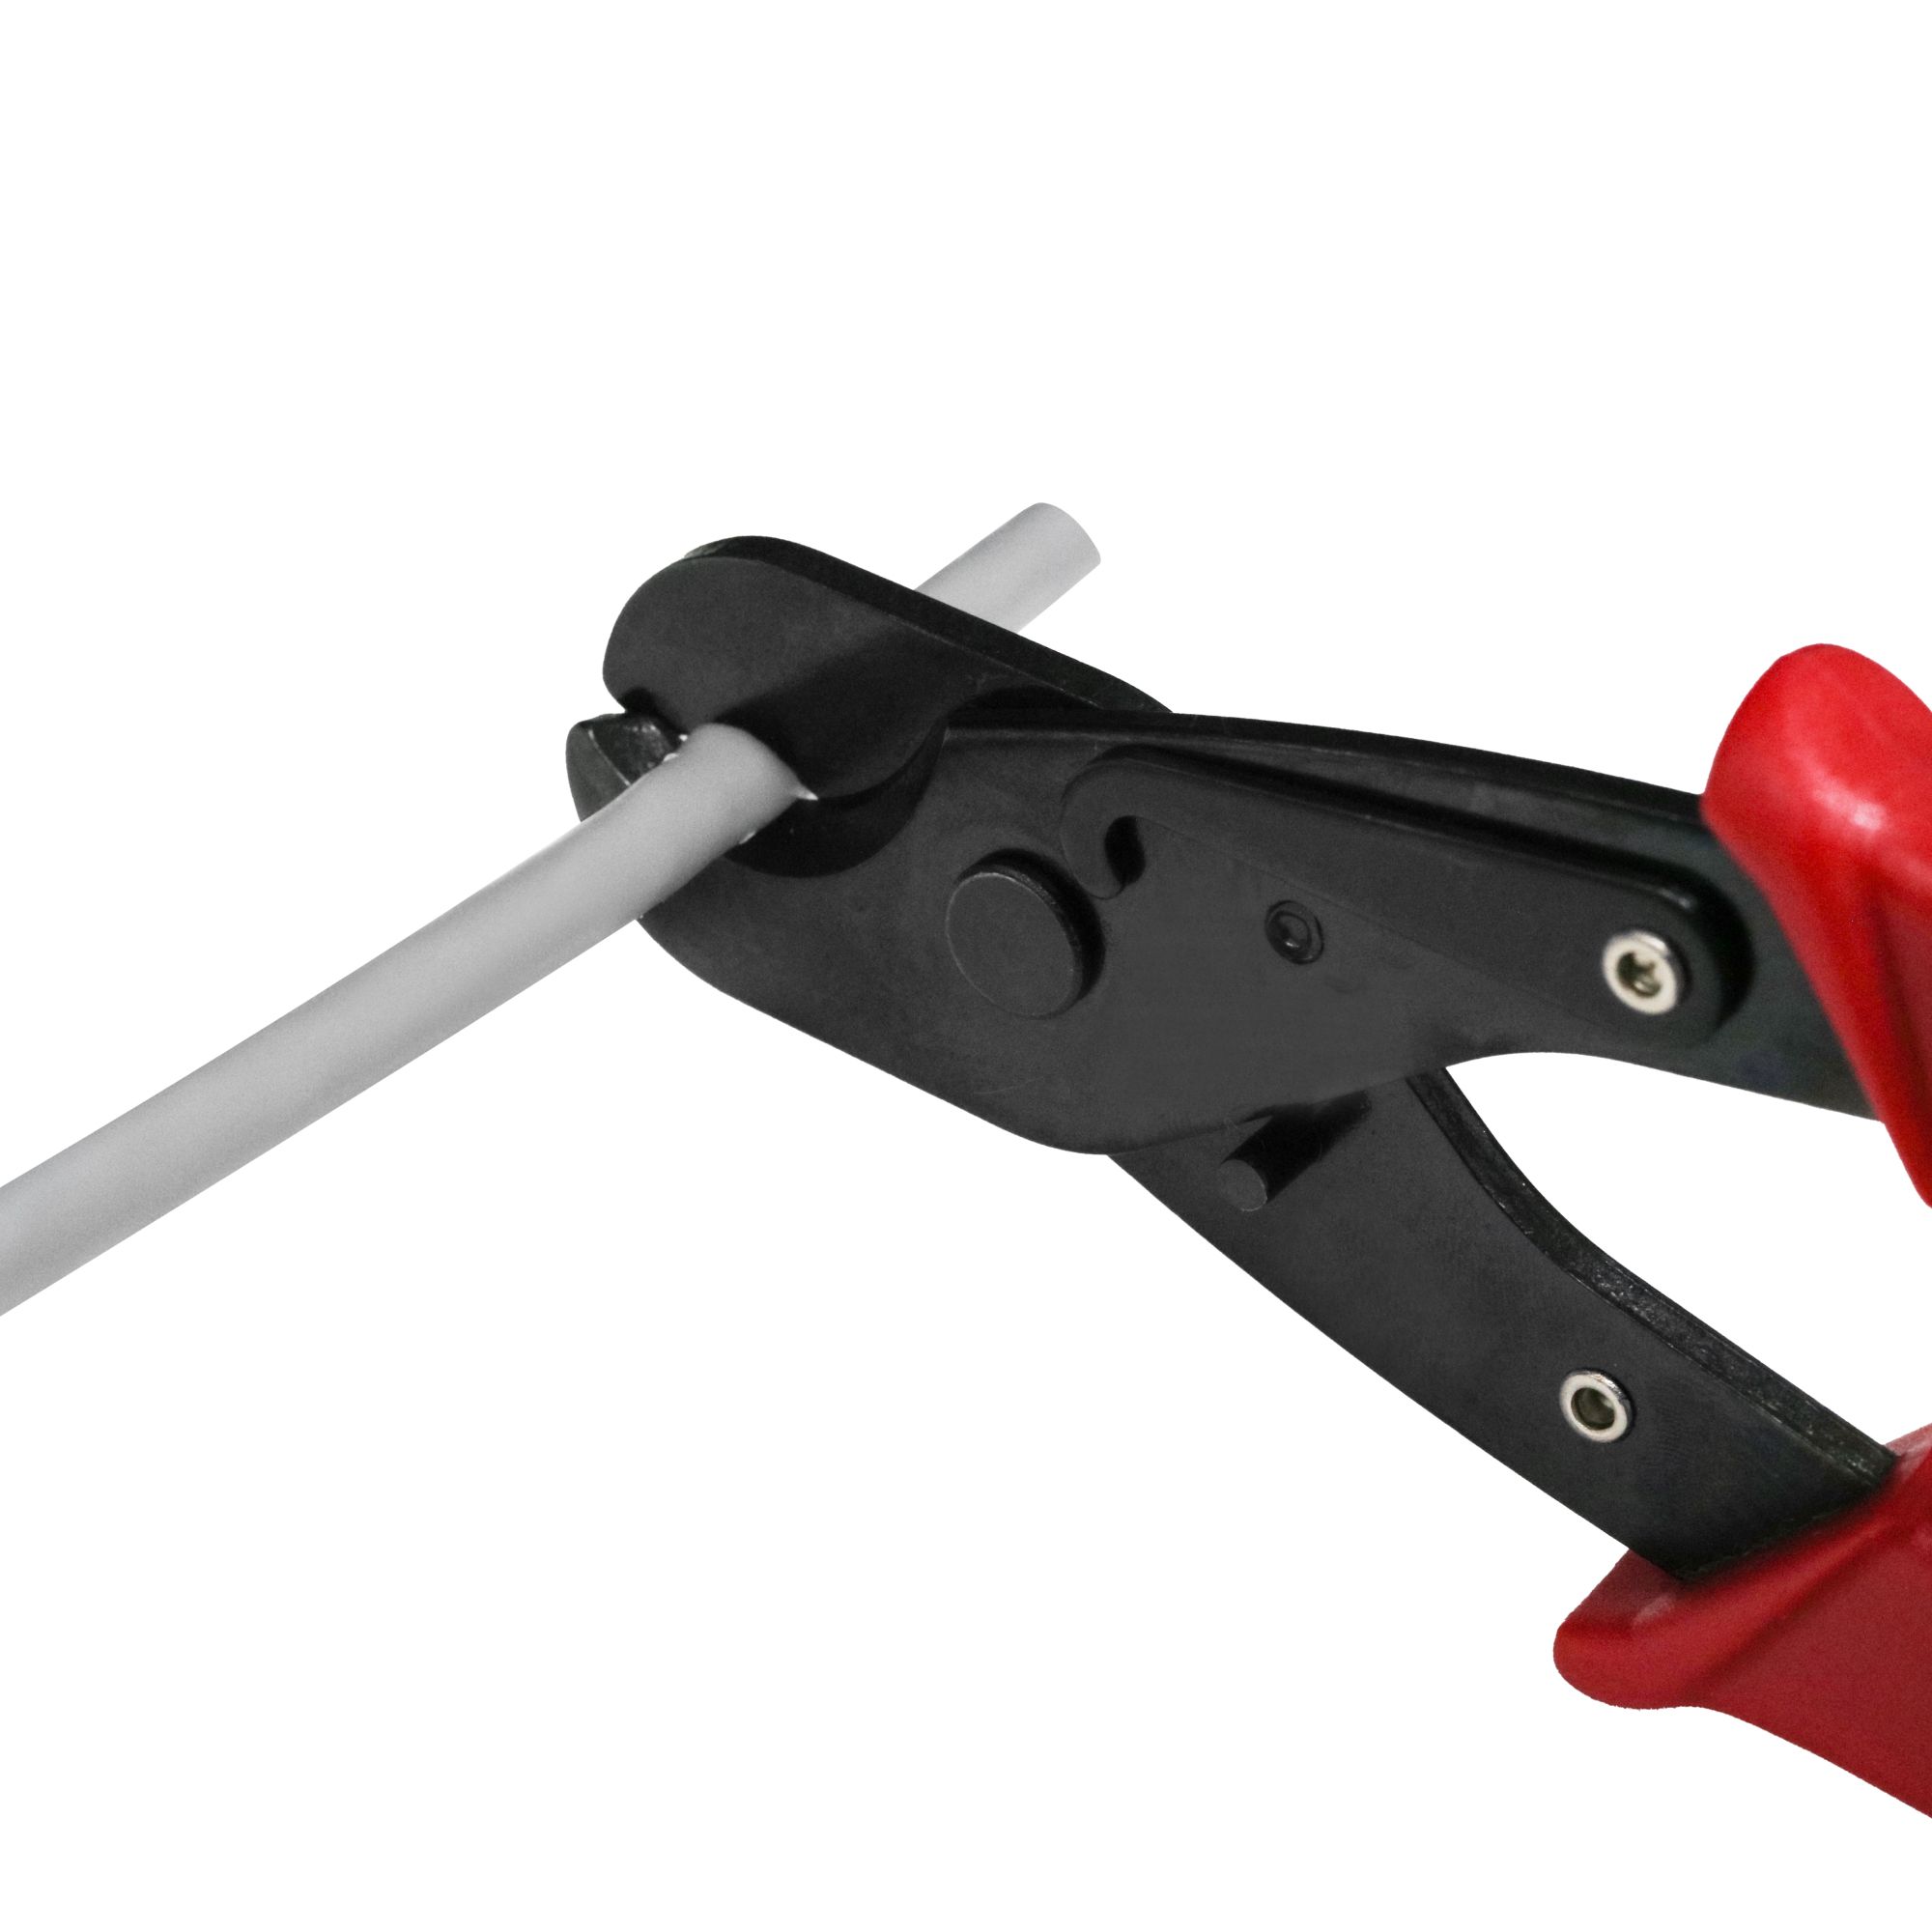 Coax & Copper Network Cable Cutter